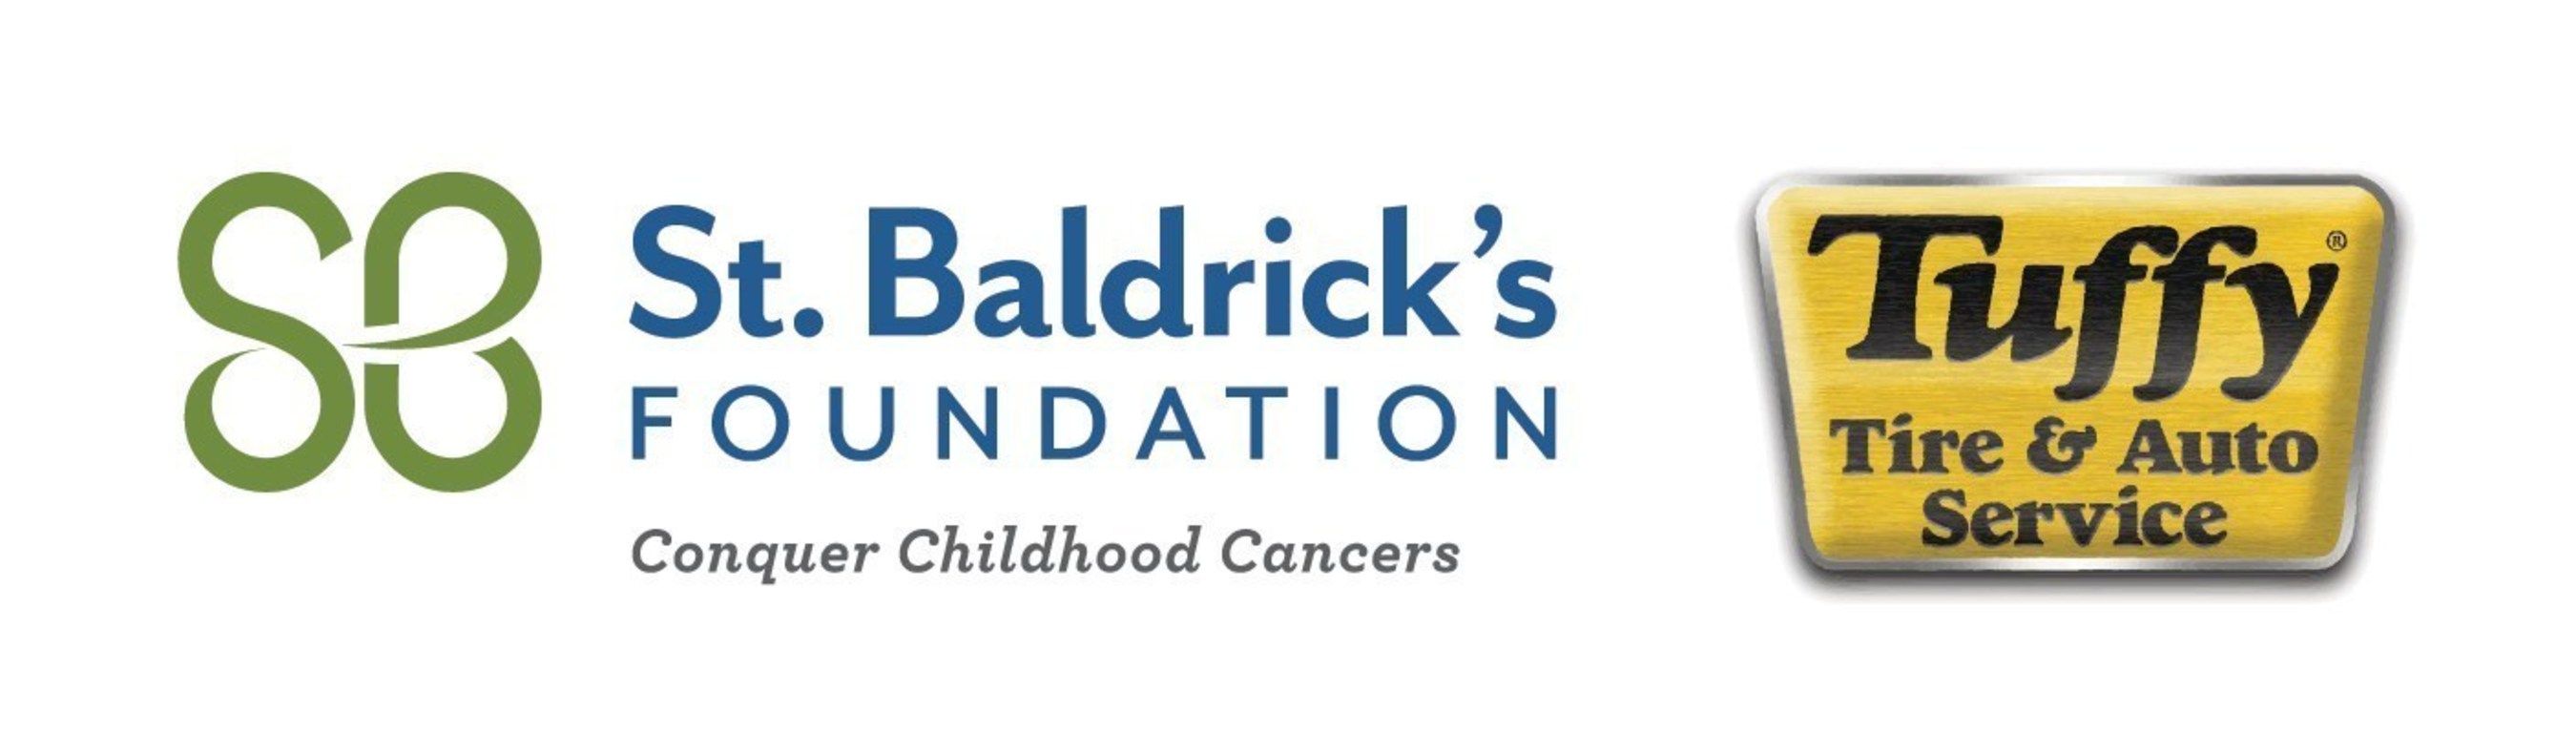 St. Baldrick's Foundation and Tuffy Tire & Auto Service Centers Partner to Help Kids with Cancer